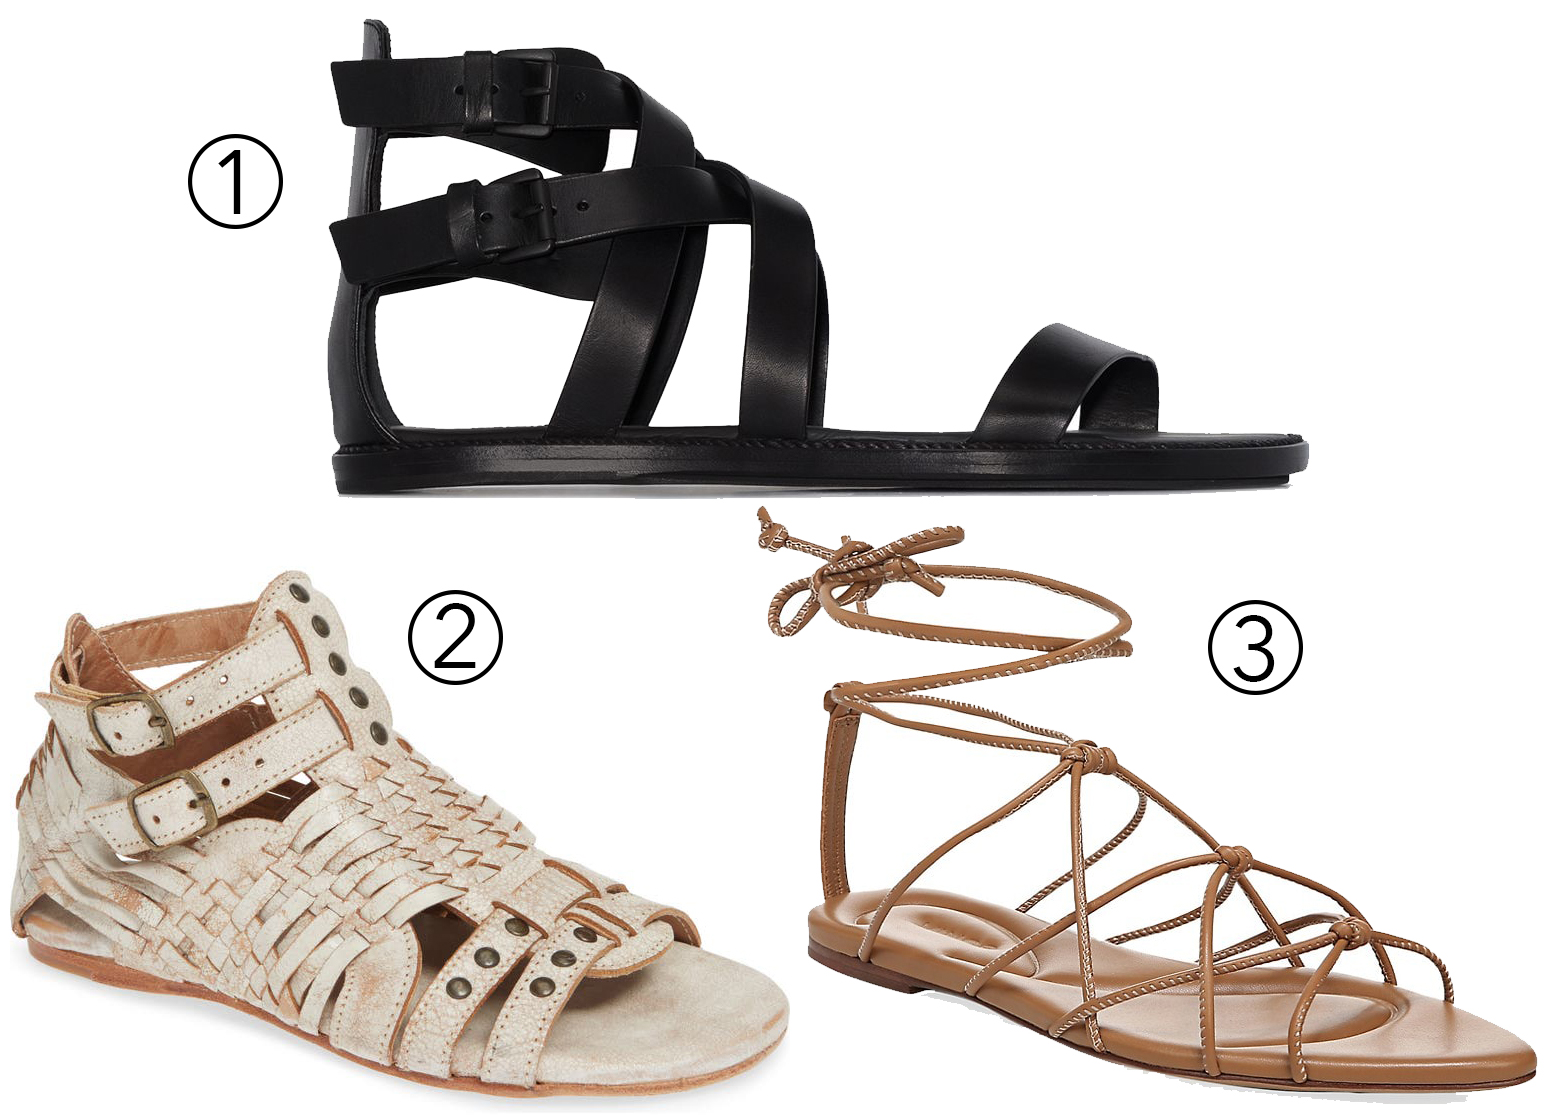 1. Ann Demeulemeester Flat Gladiator Sandals; 2. Bed Stu Claire Woven Gladiator Sandals; 3. Vince Kenna Leather Strappy Ankle-Tie Sandals